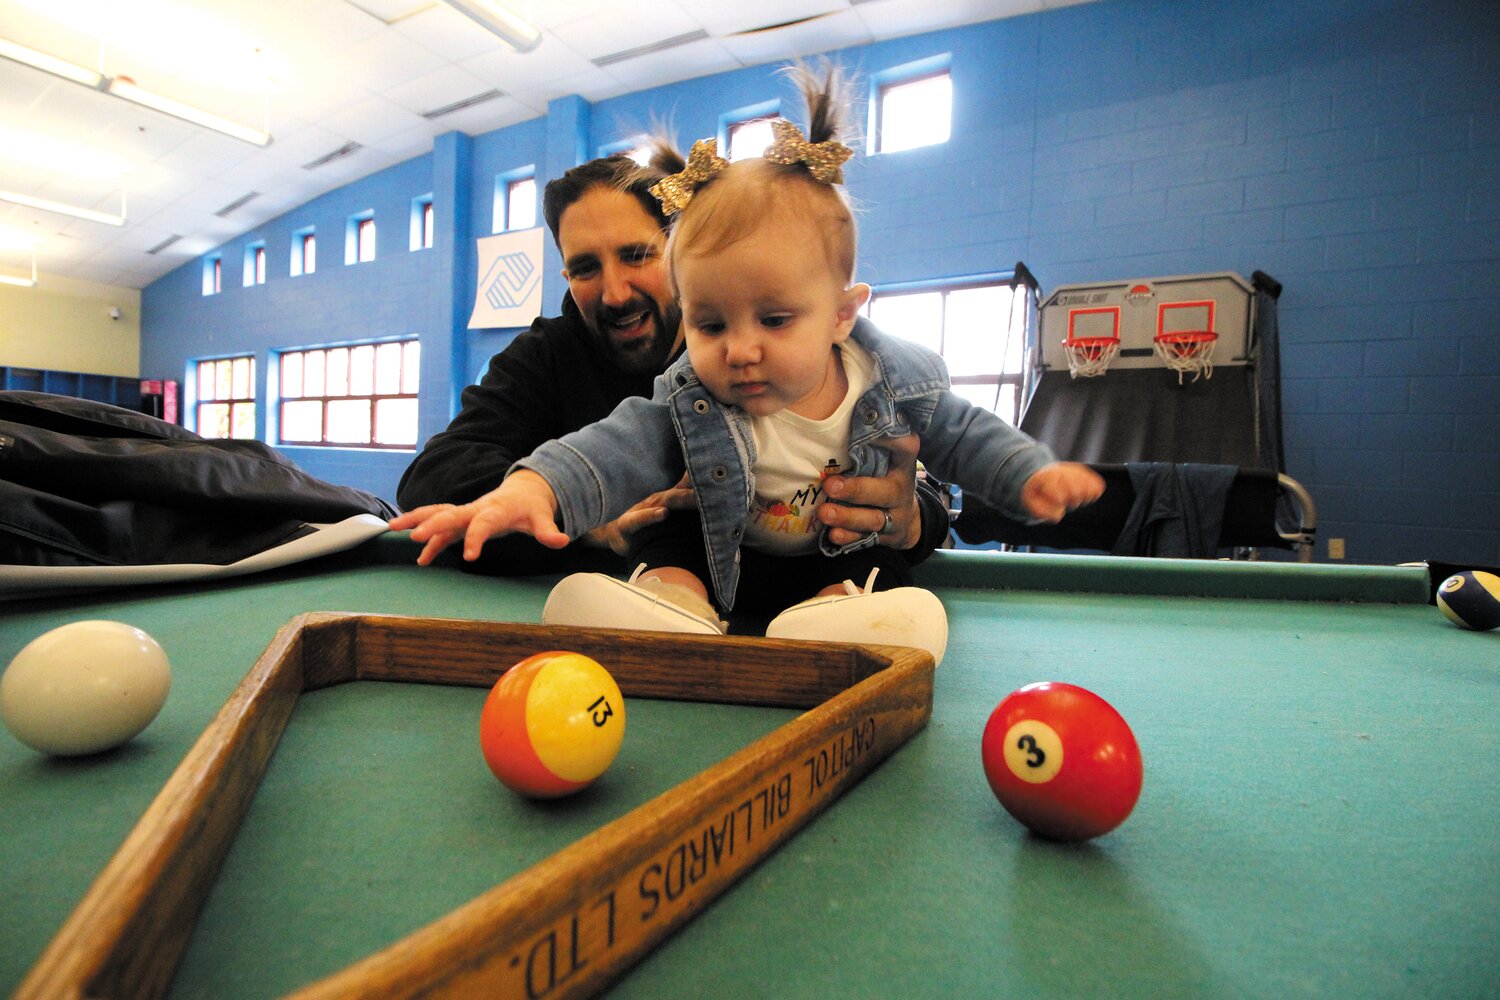 WHERE’S THE EIGHT BALL?: Six-month-old Masie, daughter of Mike and Tiffanie Murdock was introduced to pool by her father as he and his wife worked handing out turkeys and bags of food Saturday at the Boys and Girls Club.